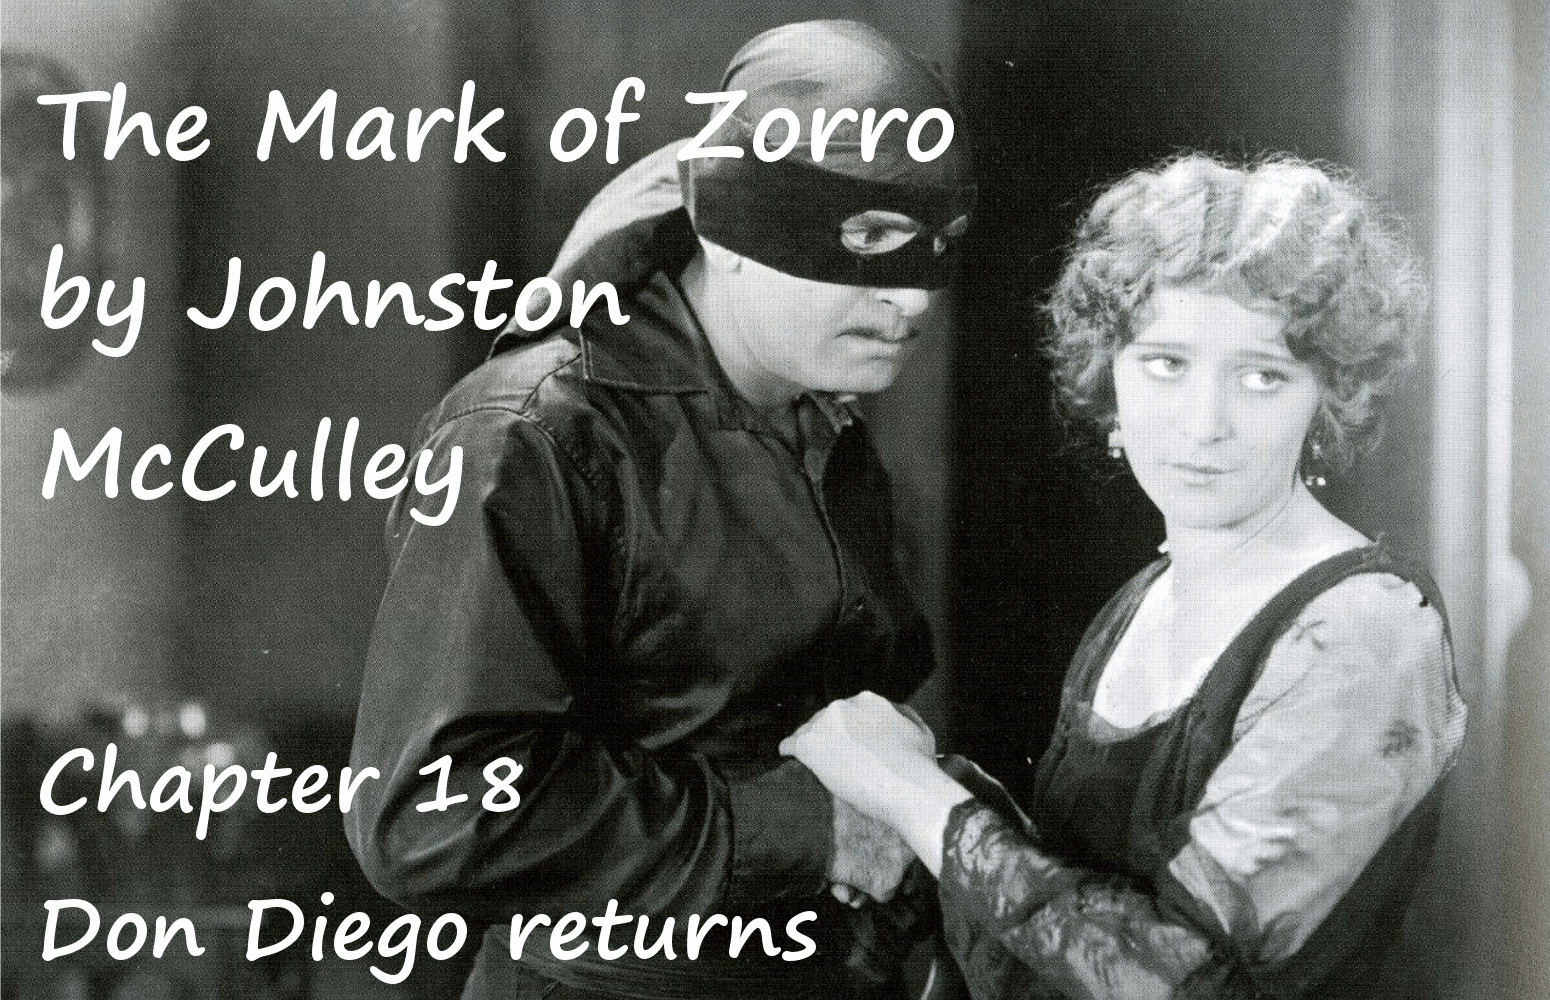 The Mark of Zorro chapter 18 Don Diego returns by Johnston McCulley